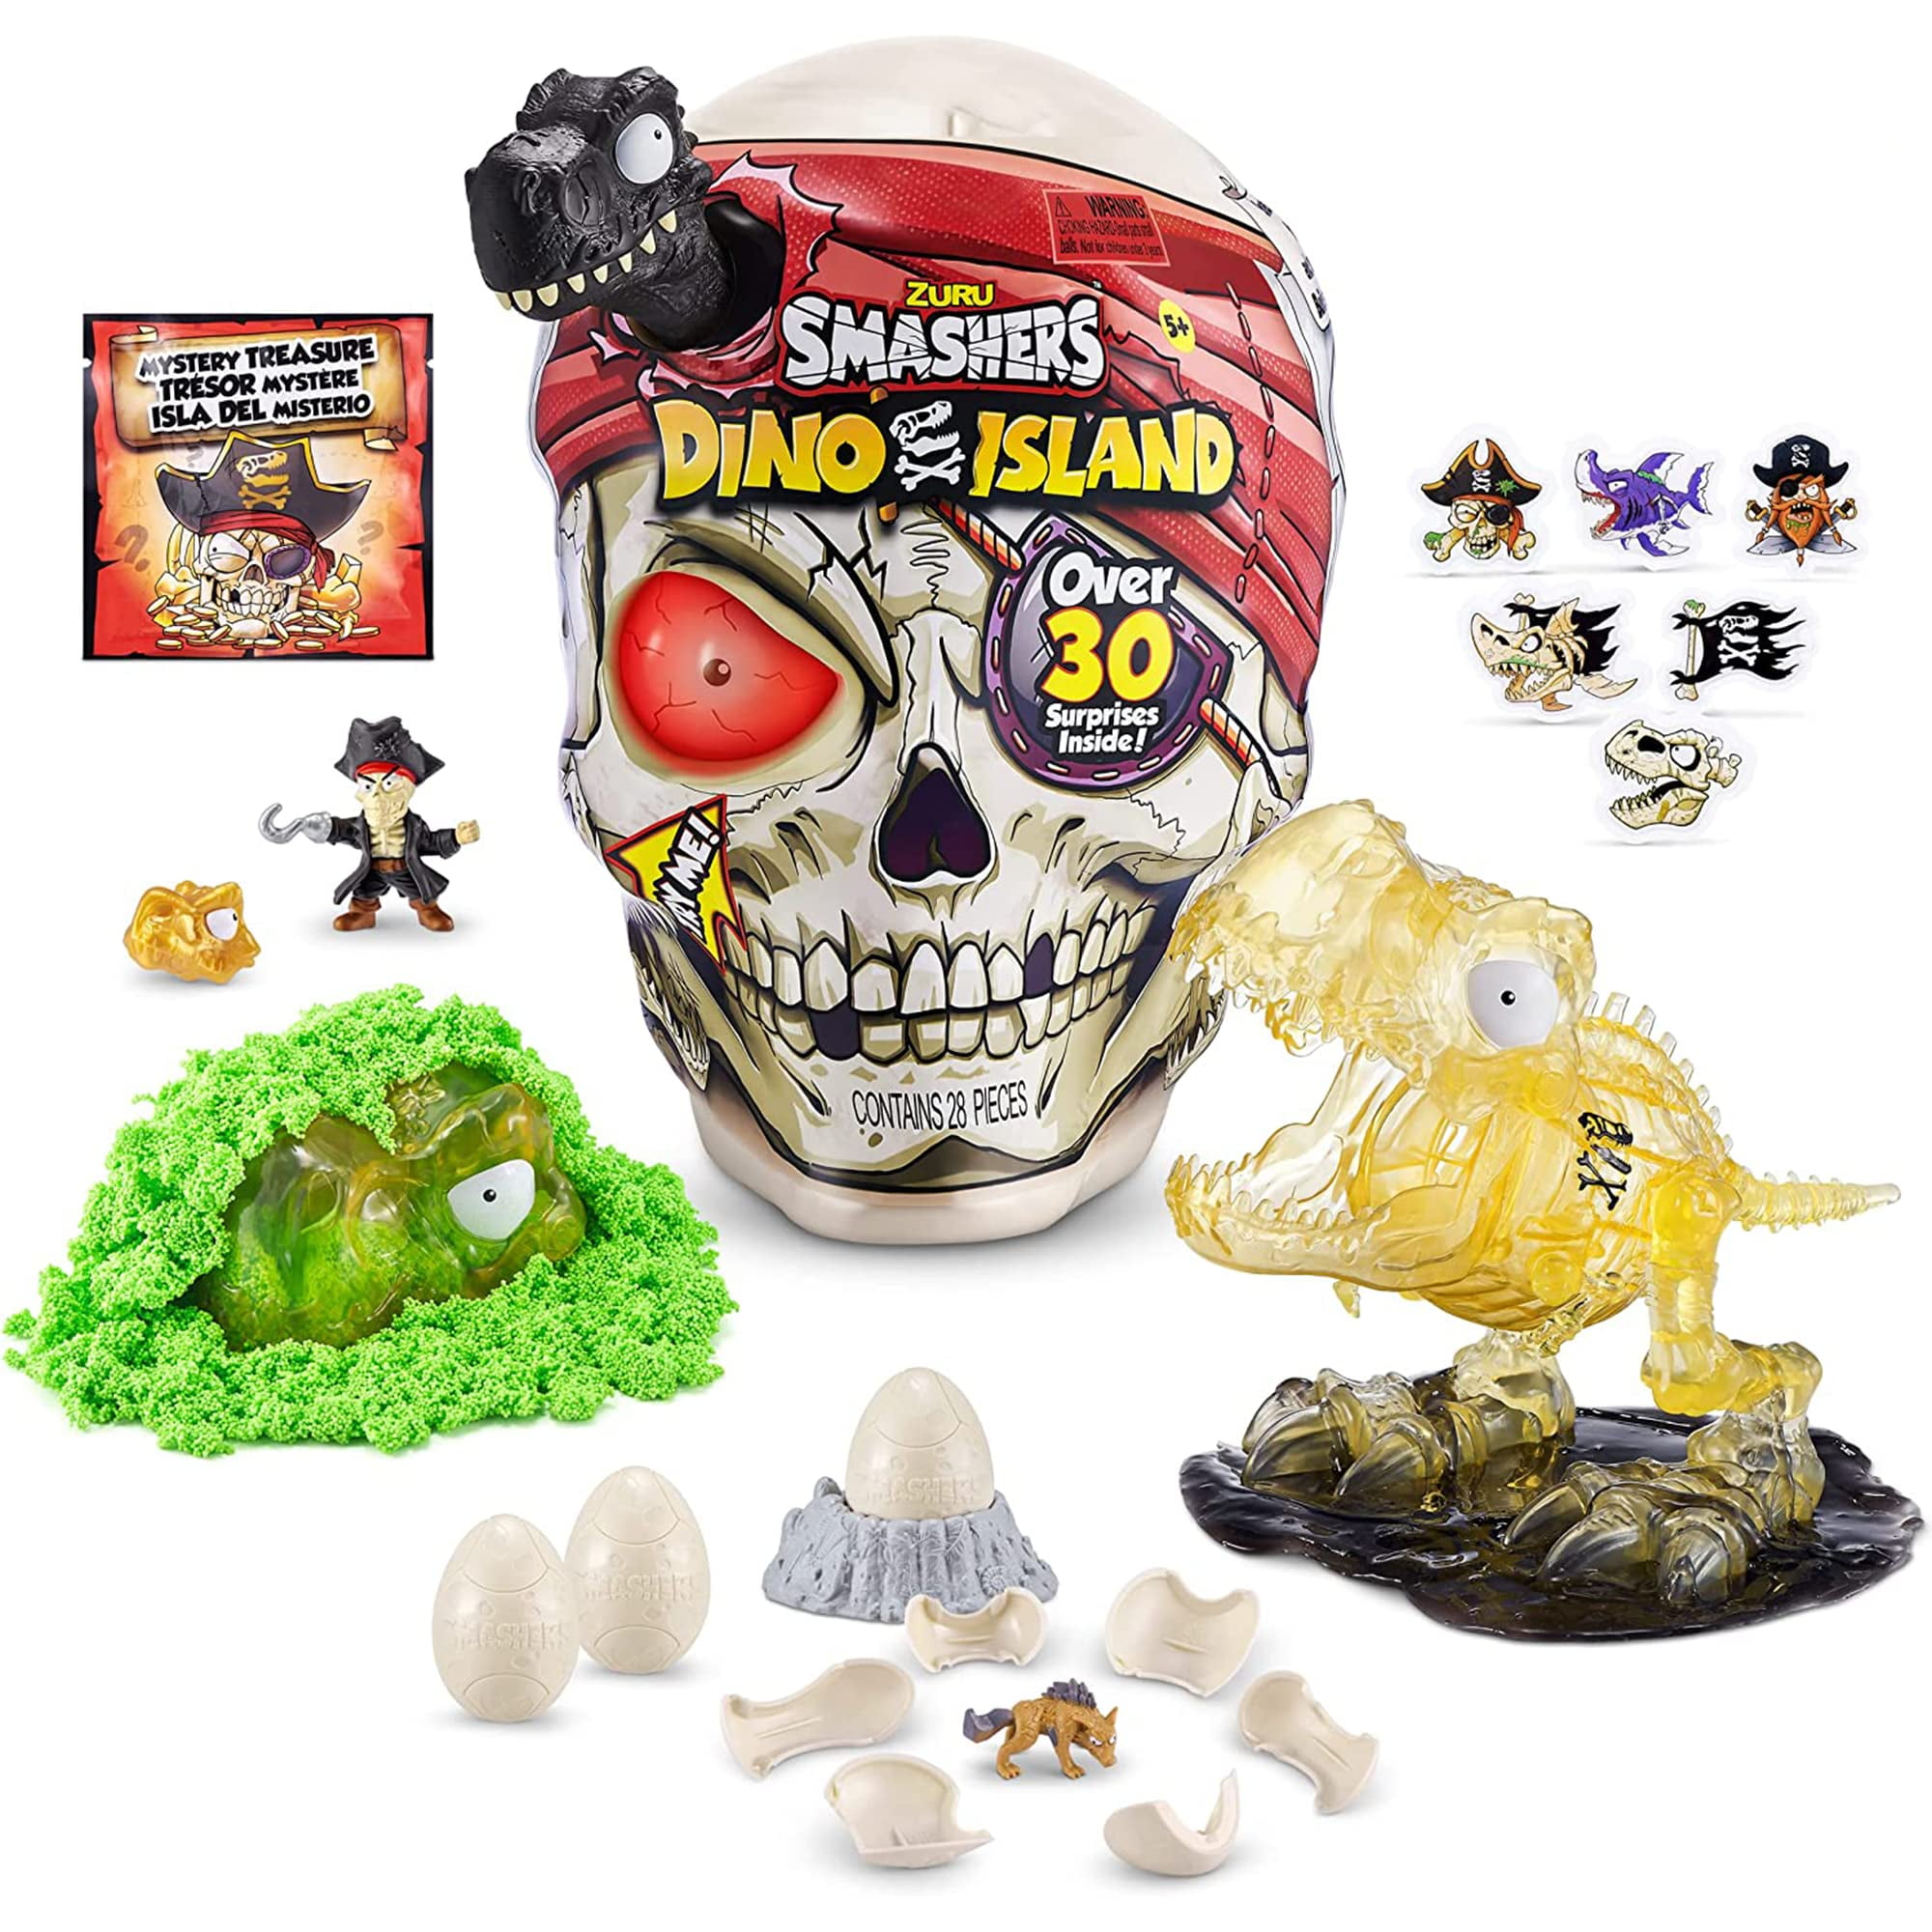 Smashers Dino Island Giant Skull (T-Rex) by ZURU with Over 30 Surprises,  Mini Eggs and Figurines, Prehistoric Discovery Toy, Dinosaur Toys, Slime,  Sand and More Age 5+ 